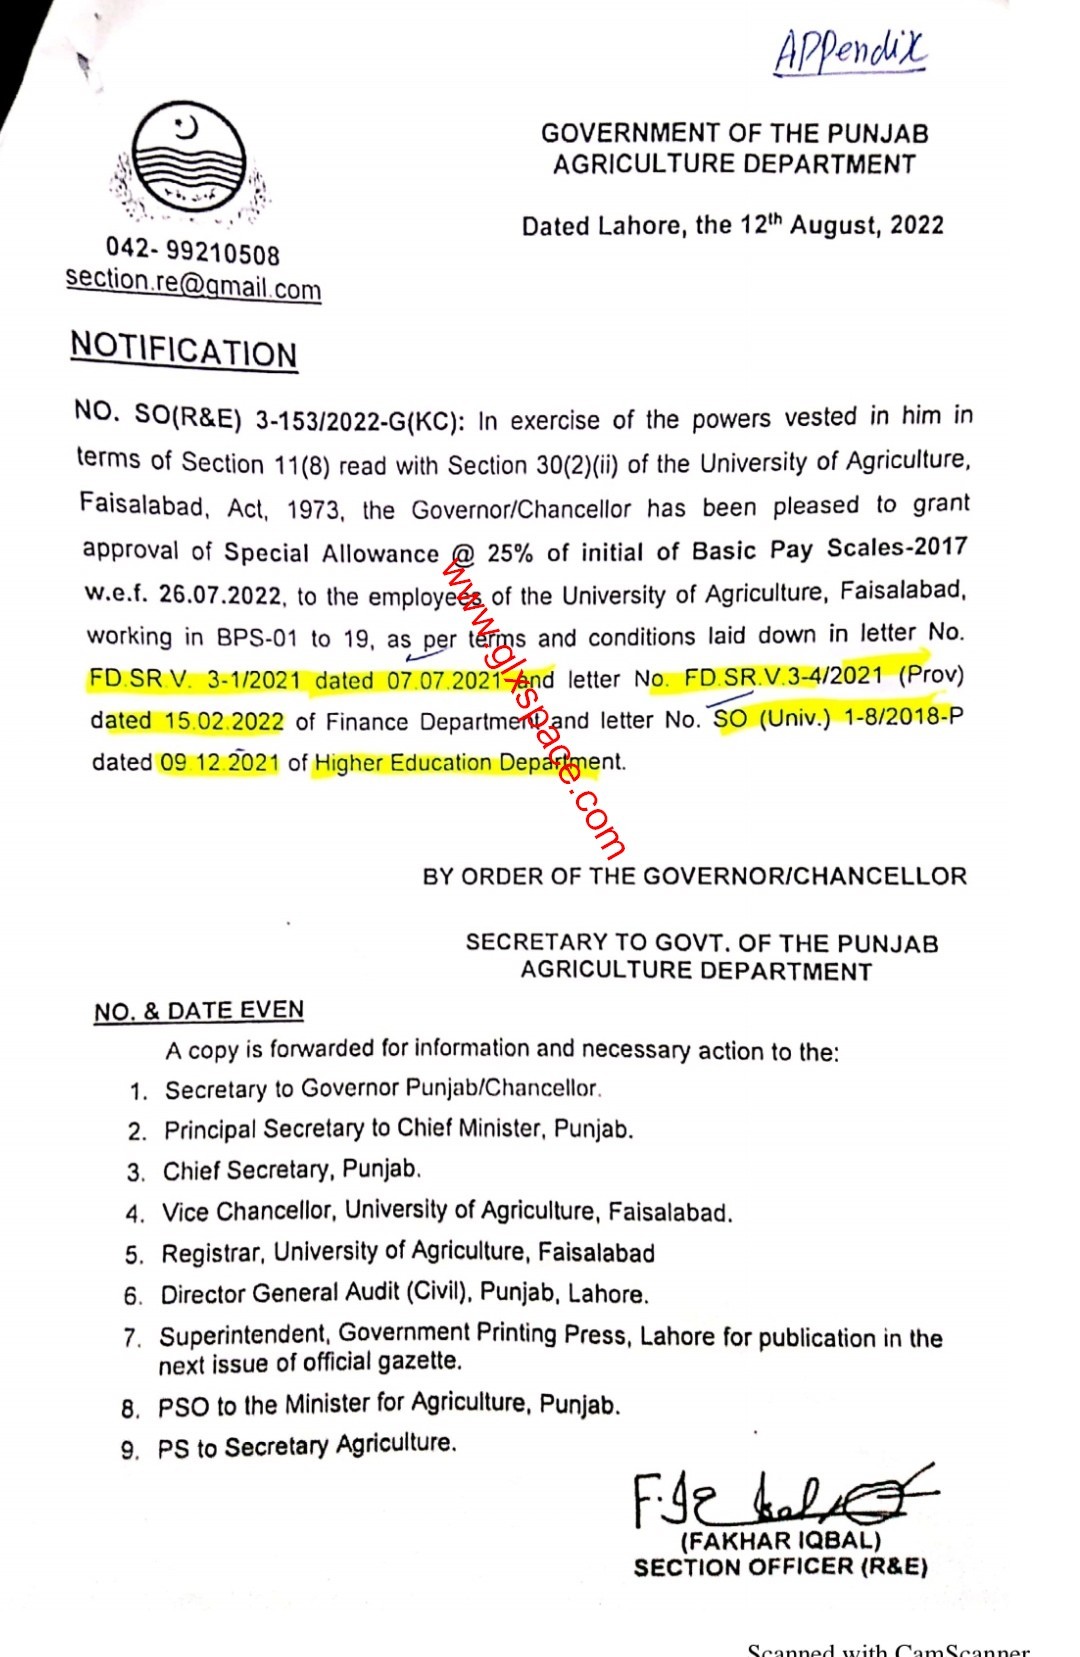 Notification of Special Allowance on Initial Basic Pay (UAF) @ 25%